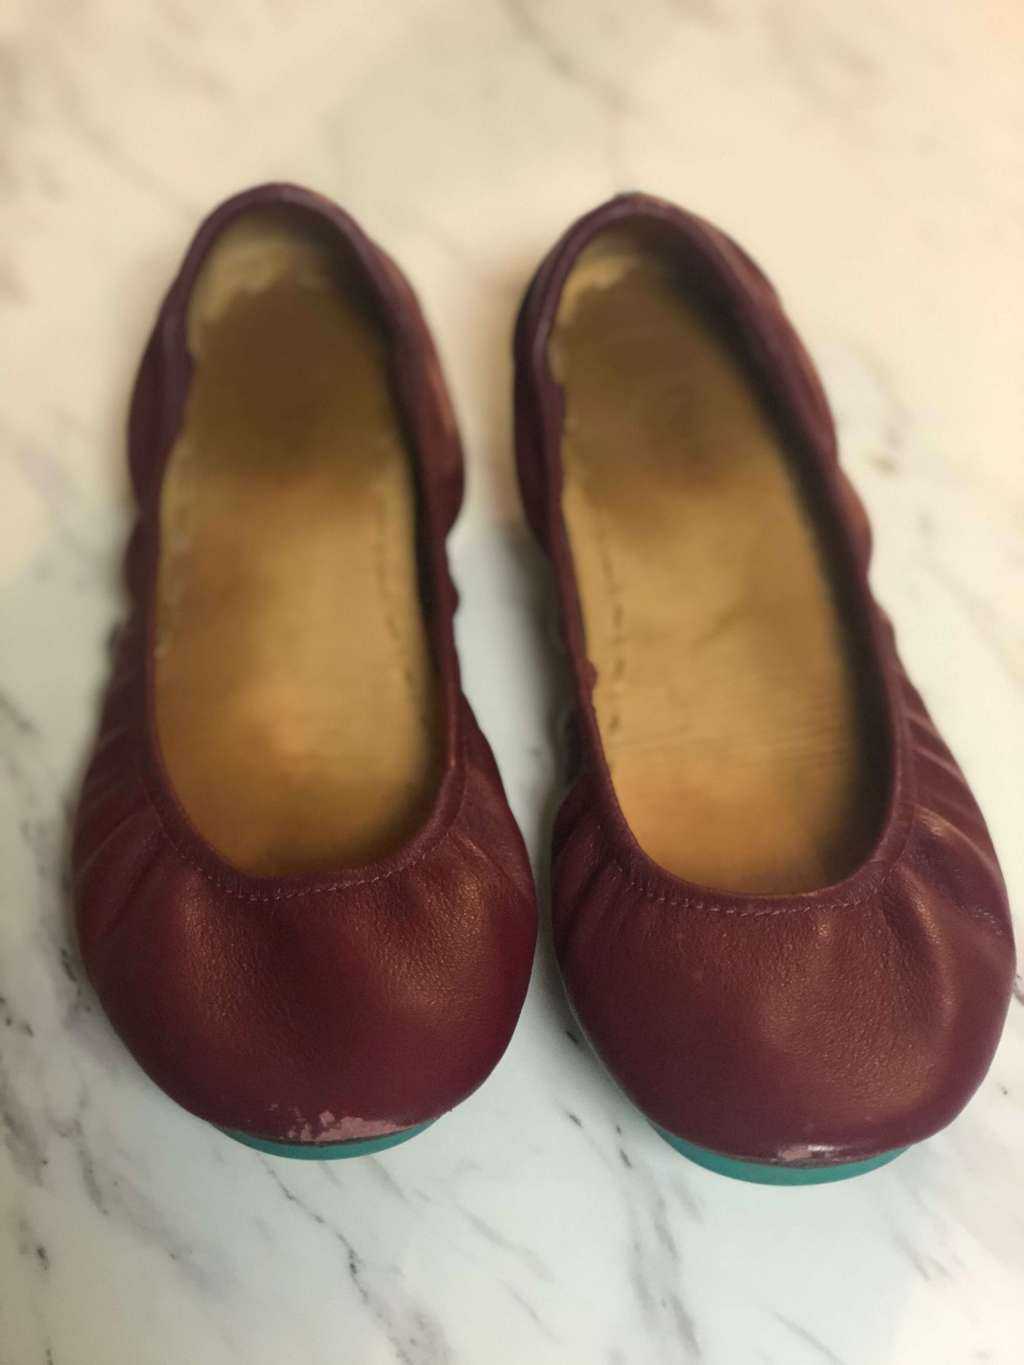 Tieks Review How I Saved 25 Off my First Pair and Were They Worth It?